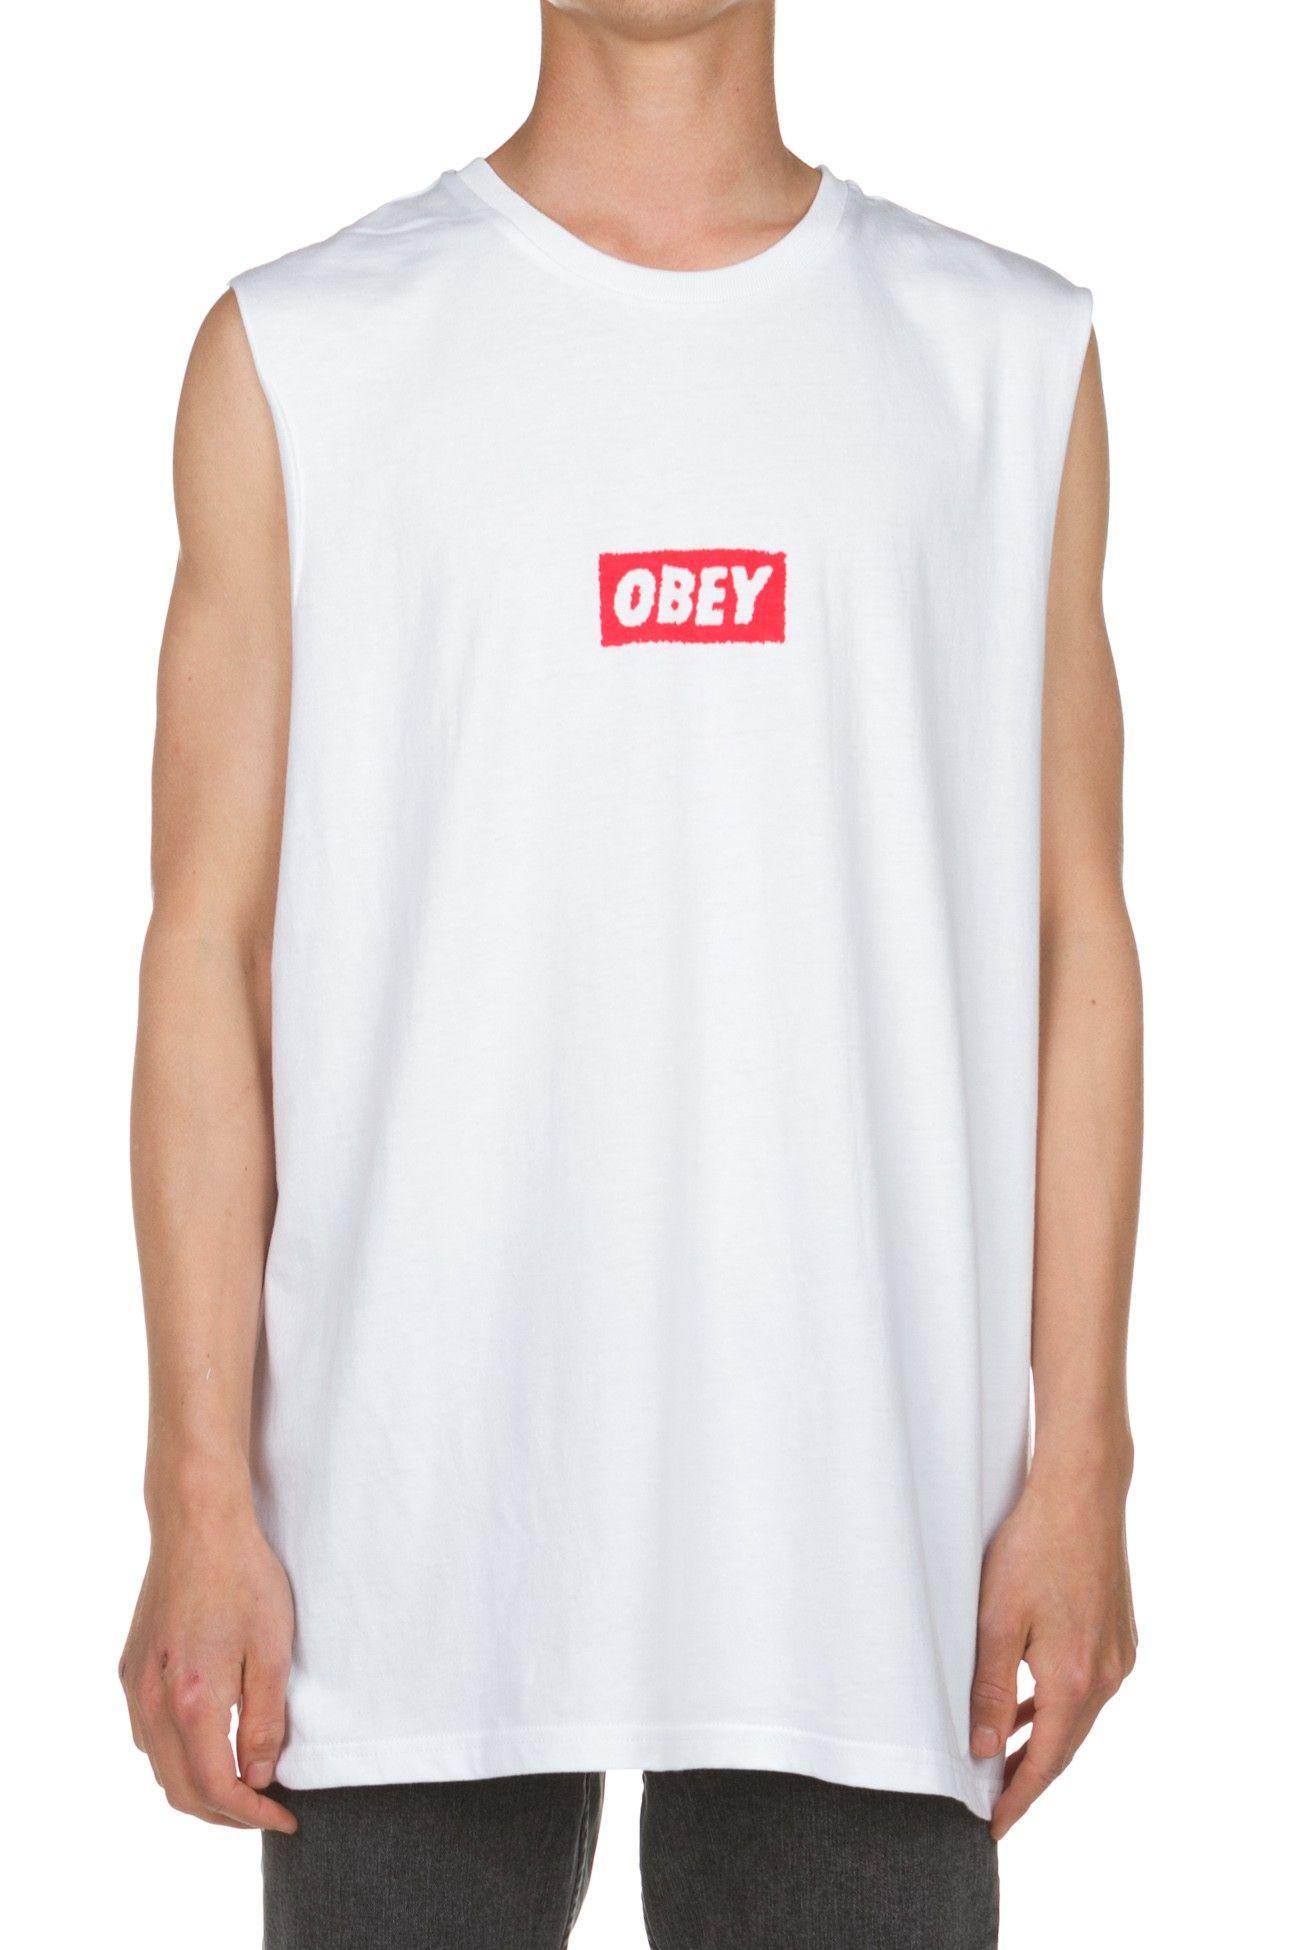 White Pyramid Logo - Buy the Obey Pyramid Logo Muscle in White | Obey Clothing